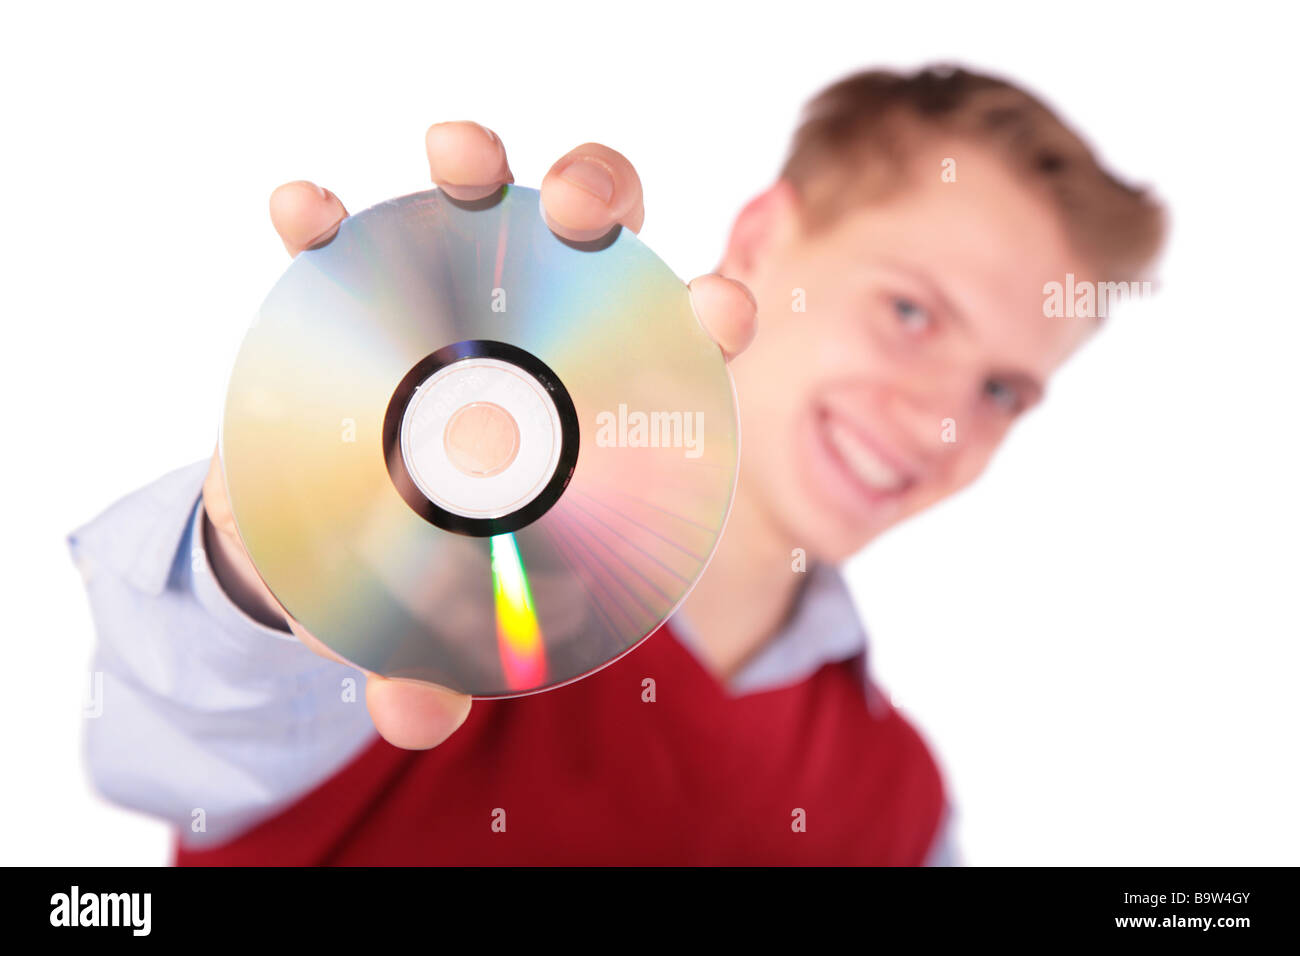 Boy in red jacket with CD Stock Photo